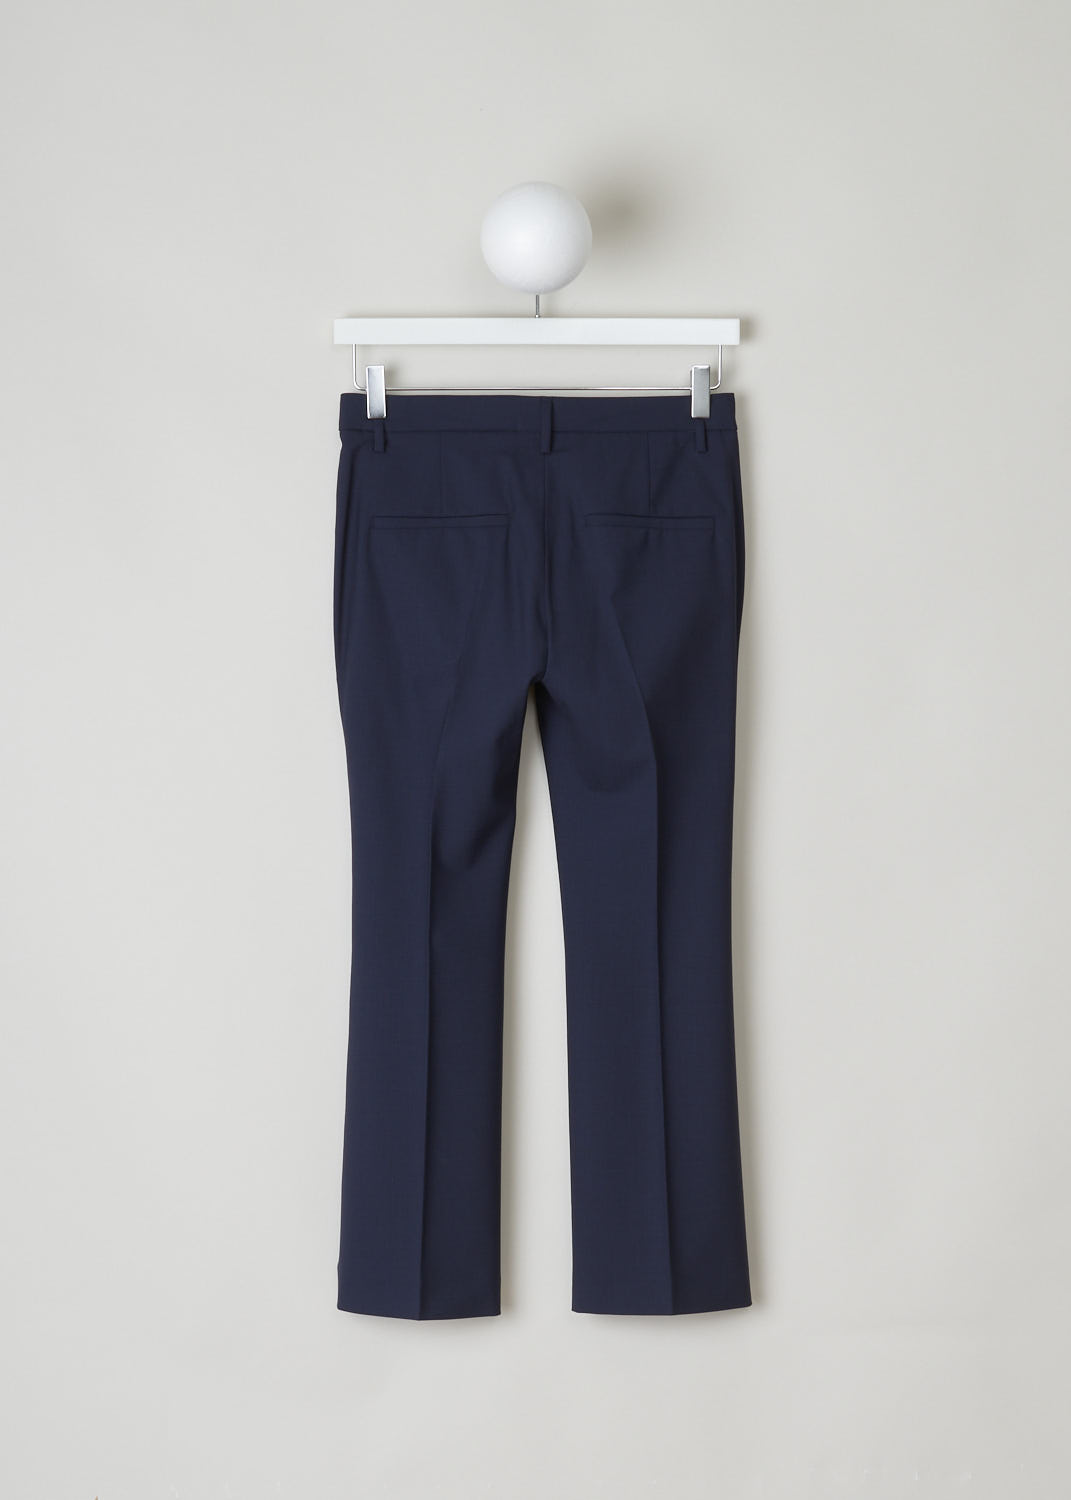 BRUNELLO CUCINELLI, NAVY BLUE STRAIGHT LEG TROUSERS, M0W07P1951_C2831, Blue, Back, Navy blue pants, featuring a flat front model. This low-cut model has a cropped length, slanted pockets in the front and two welt pockets in the back. Fastening option on this model is a zipper, a metal clip and a backing button. 
